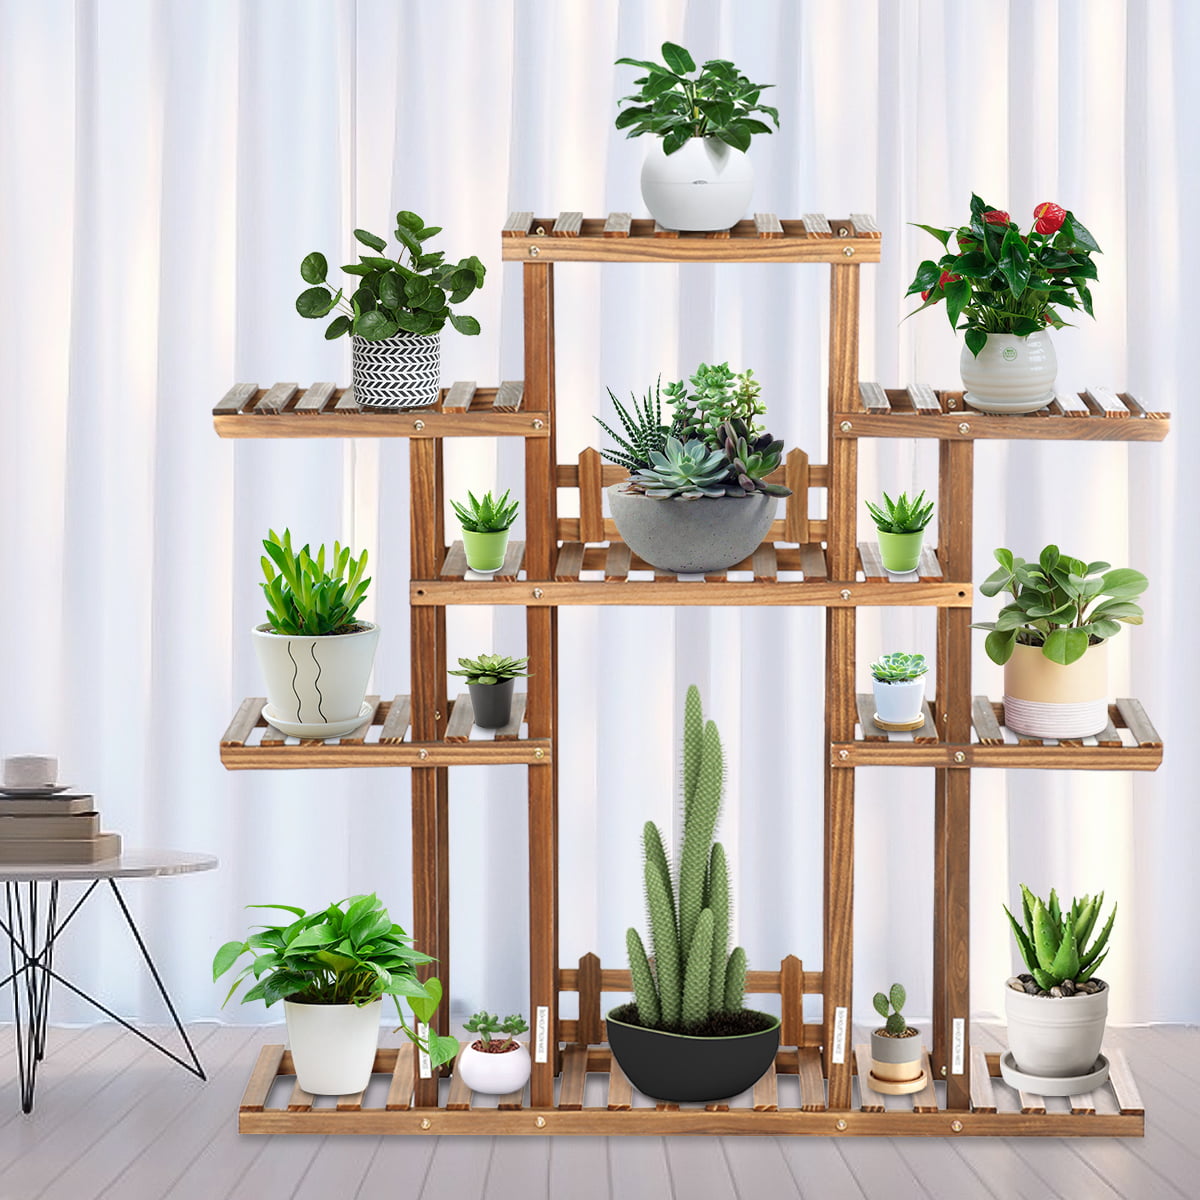 Details about   Small Medium Large Multi Tier Tiered Plant Stand Carbonized Shelf Holder Flower 